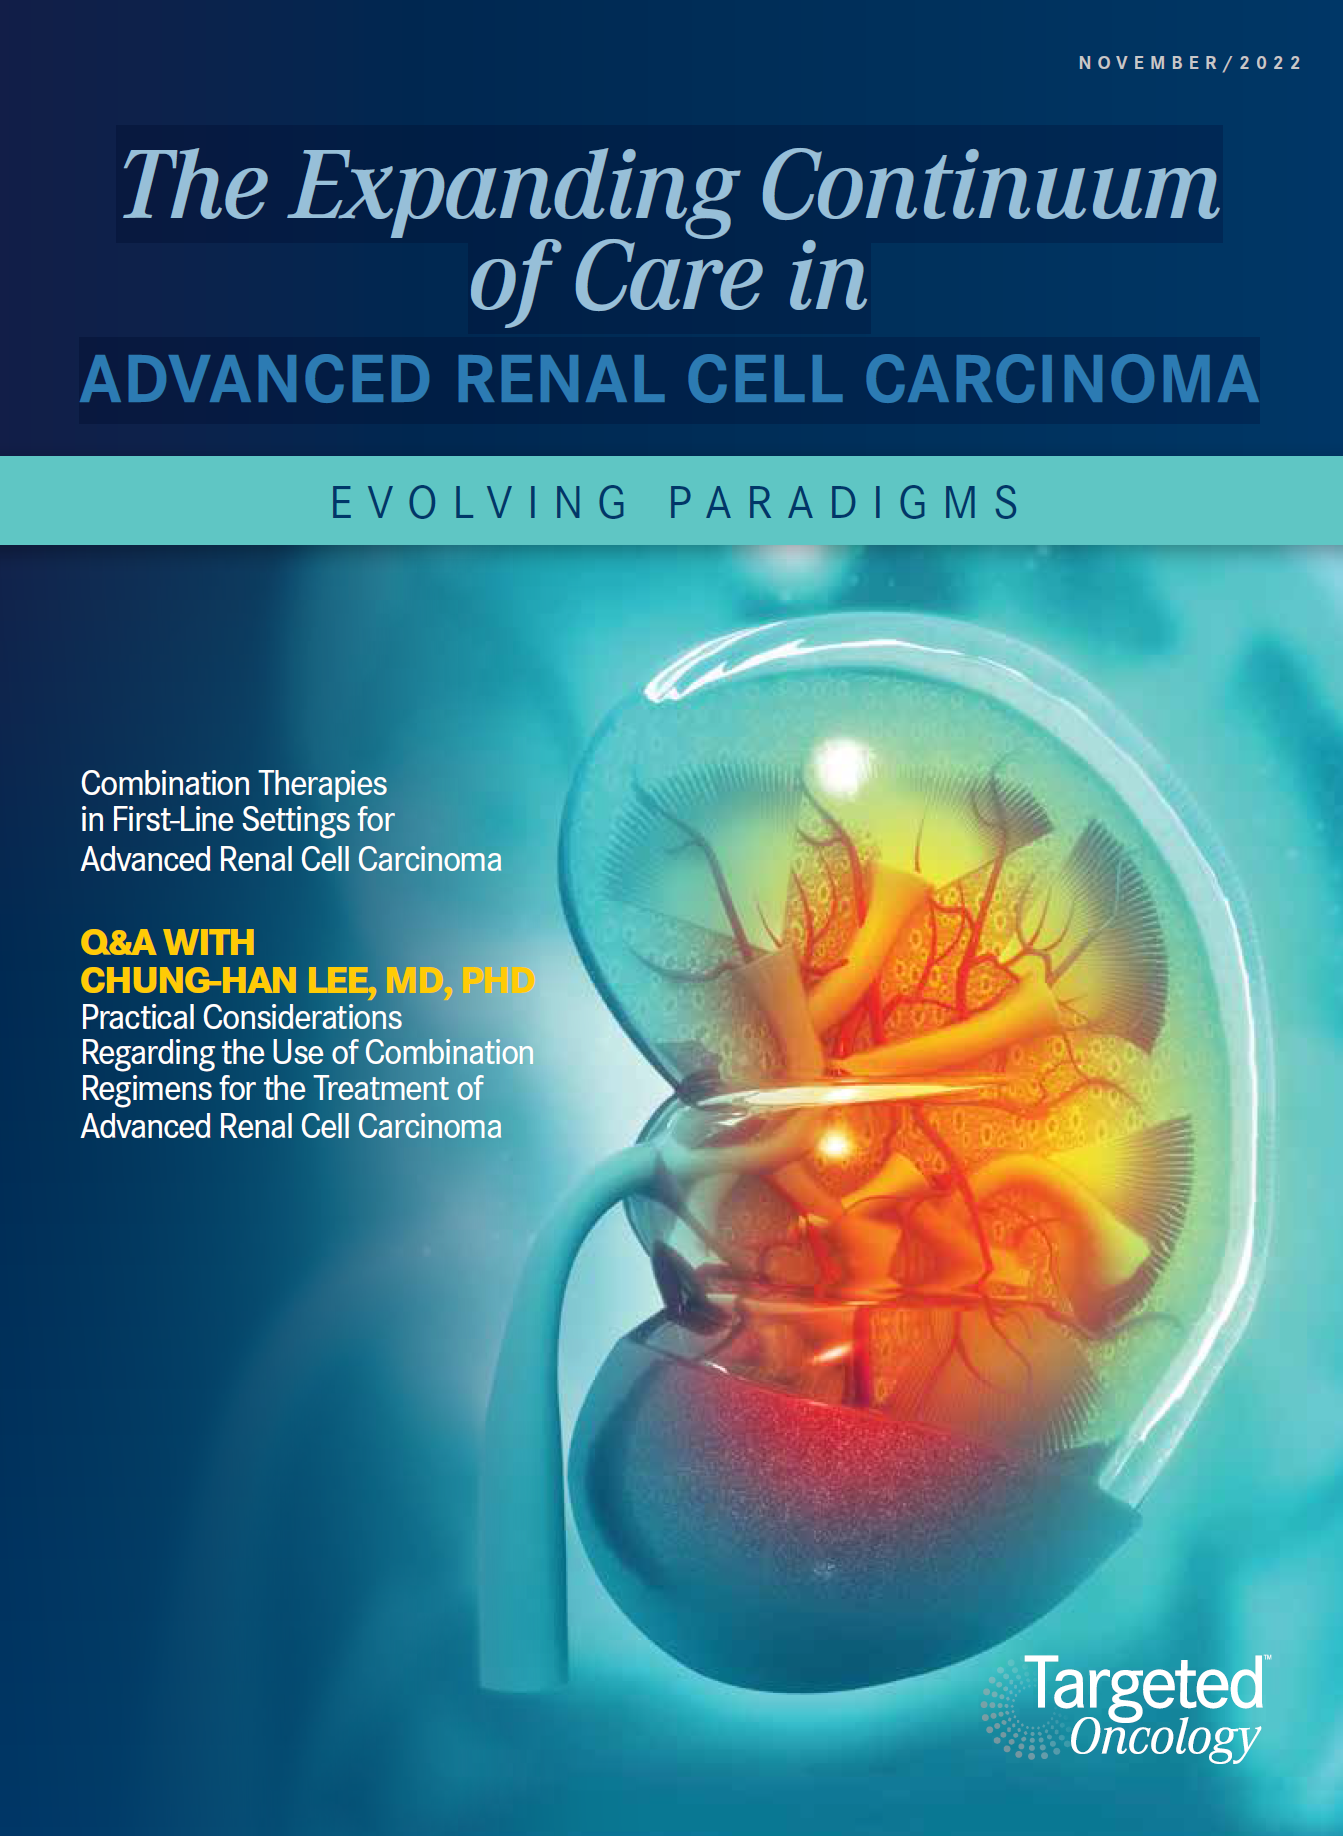 The Expanding Continuum of Care in Advanced Renal Cell Carcinoma